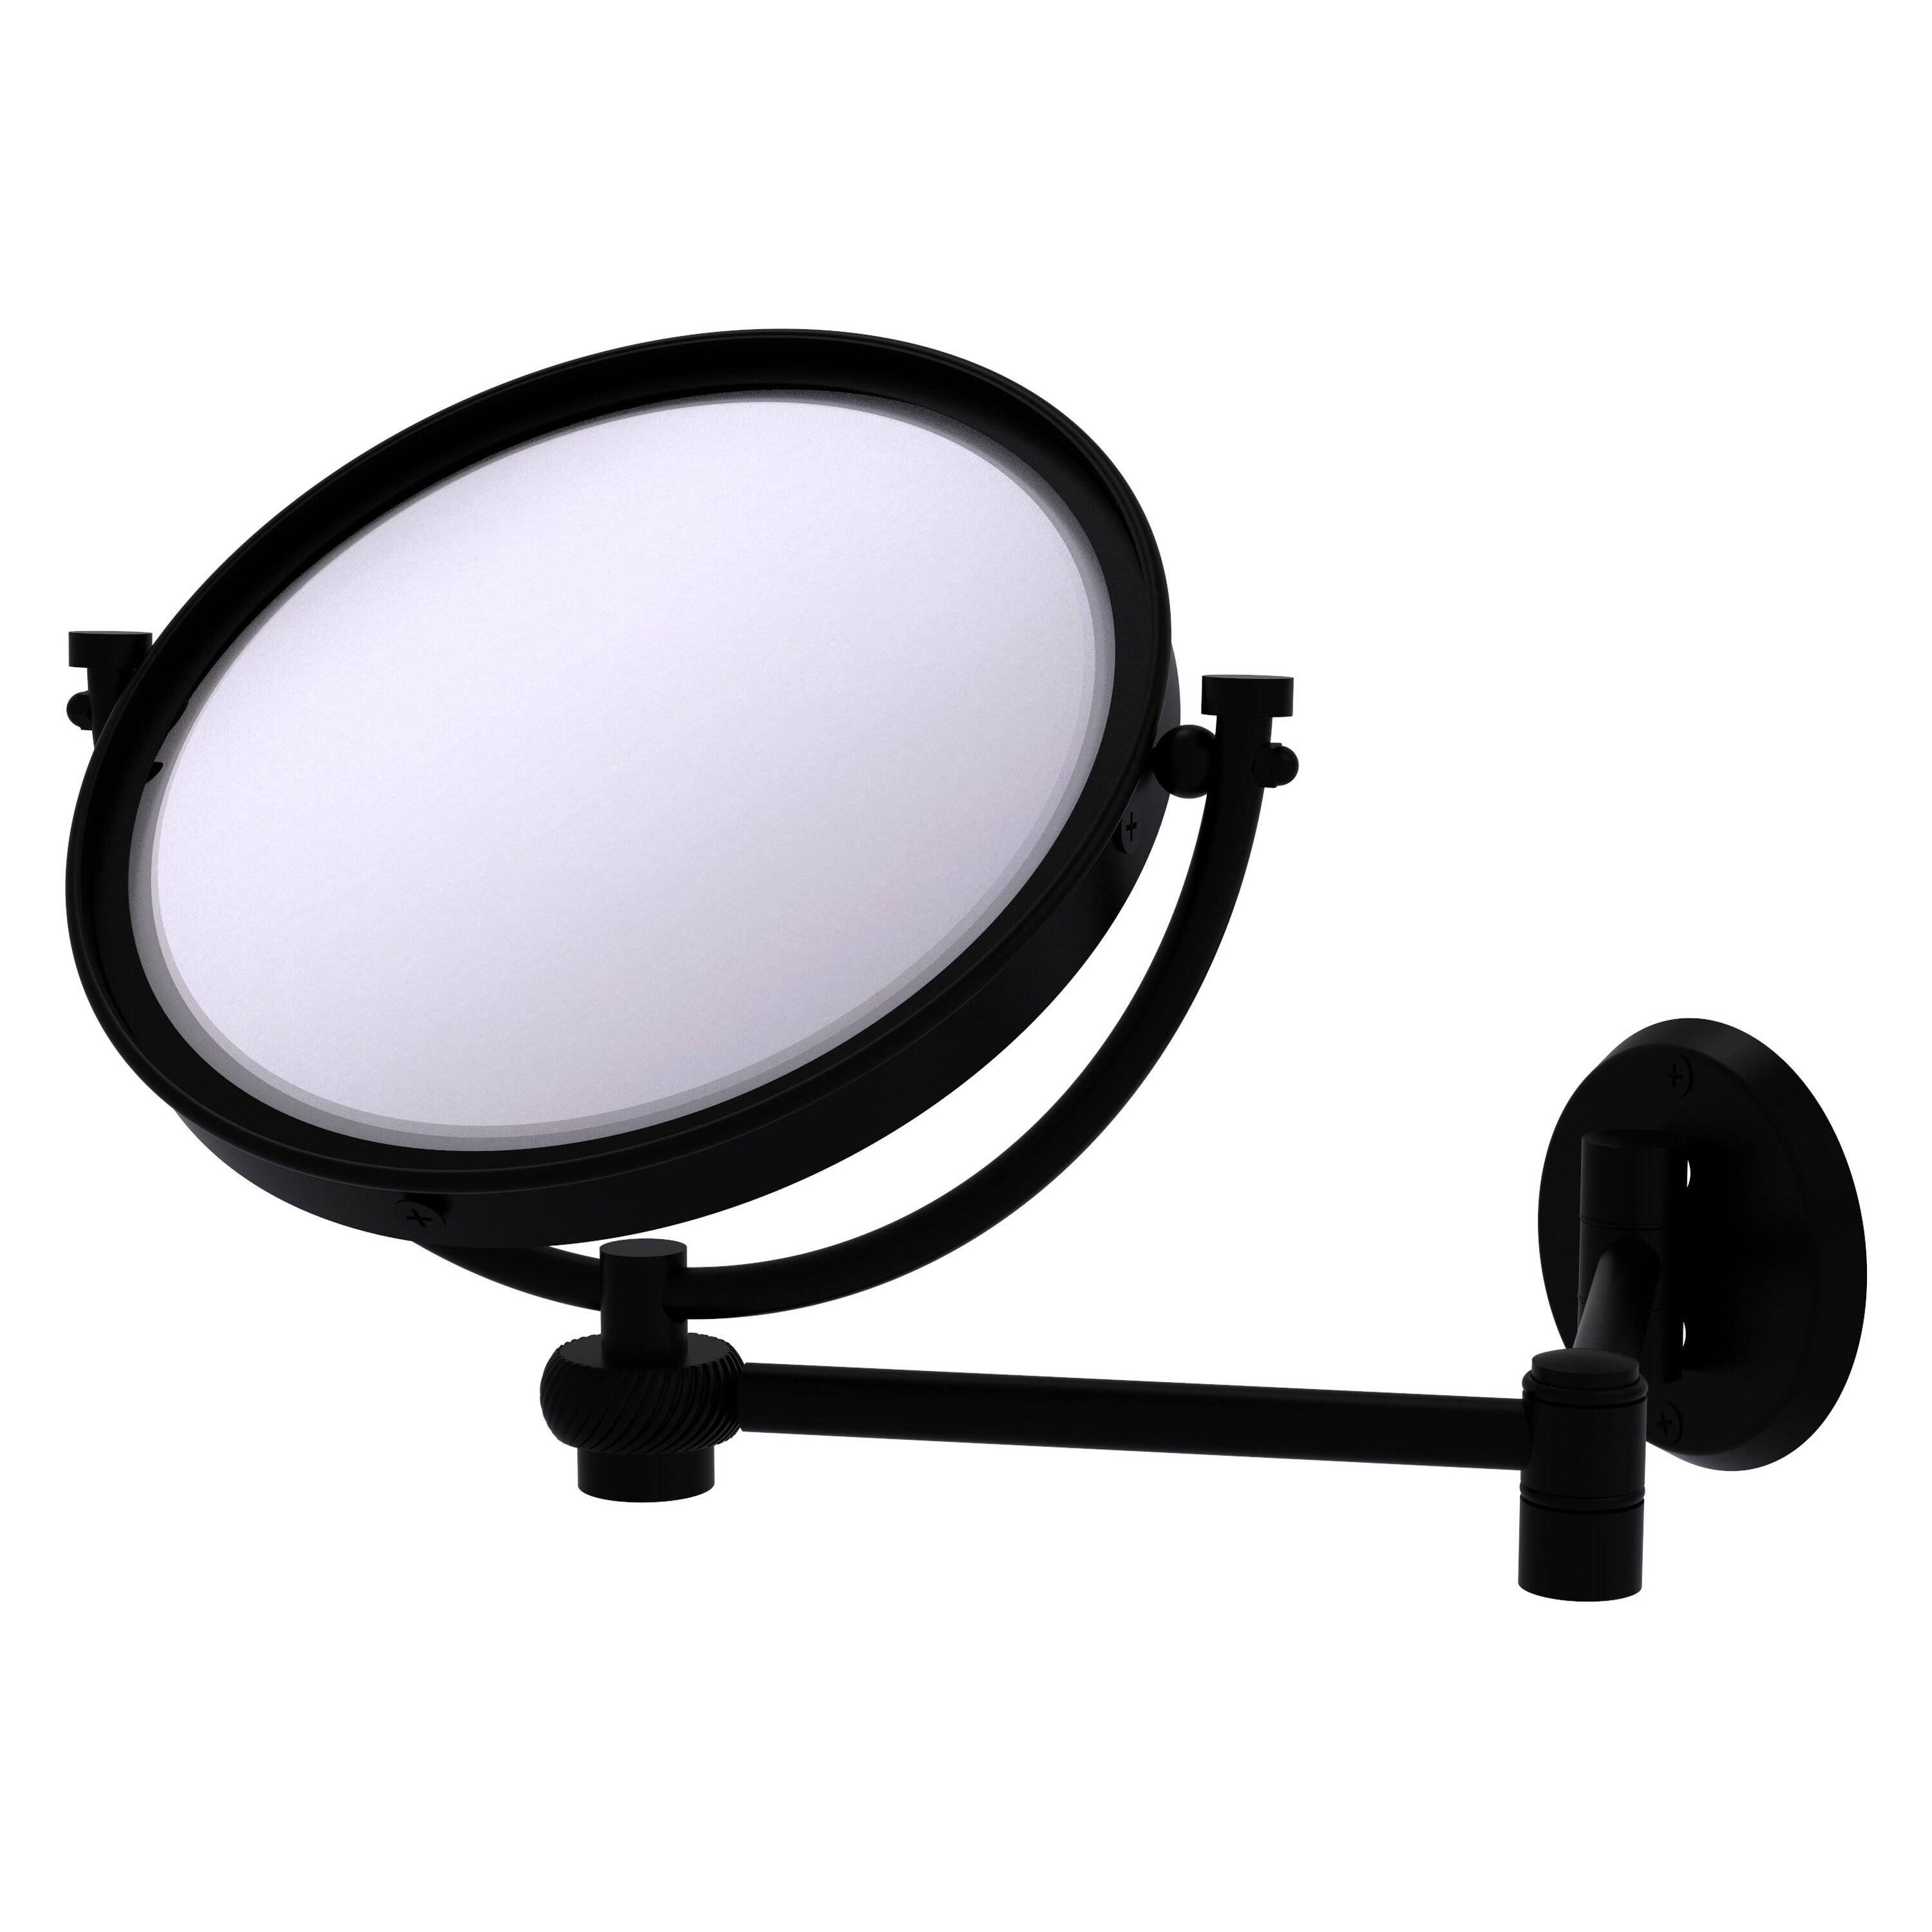 8-in x 10-in Matte Gray Double-sided 3X Magnifying Wall-mounted Vanity Mirror | - Allied Brass WM-6T/3X-BKM